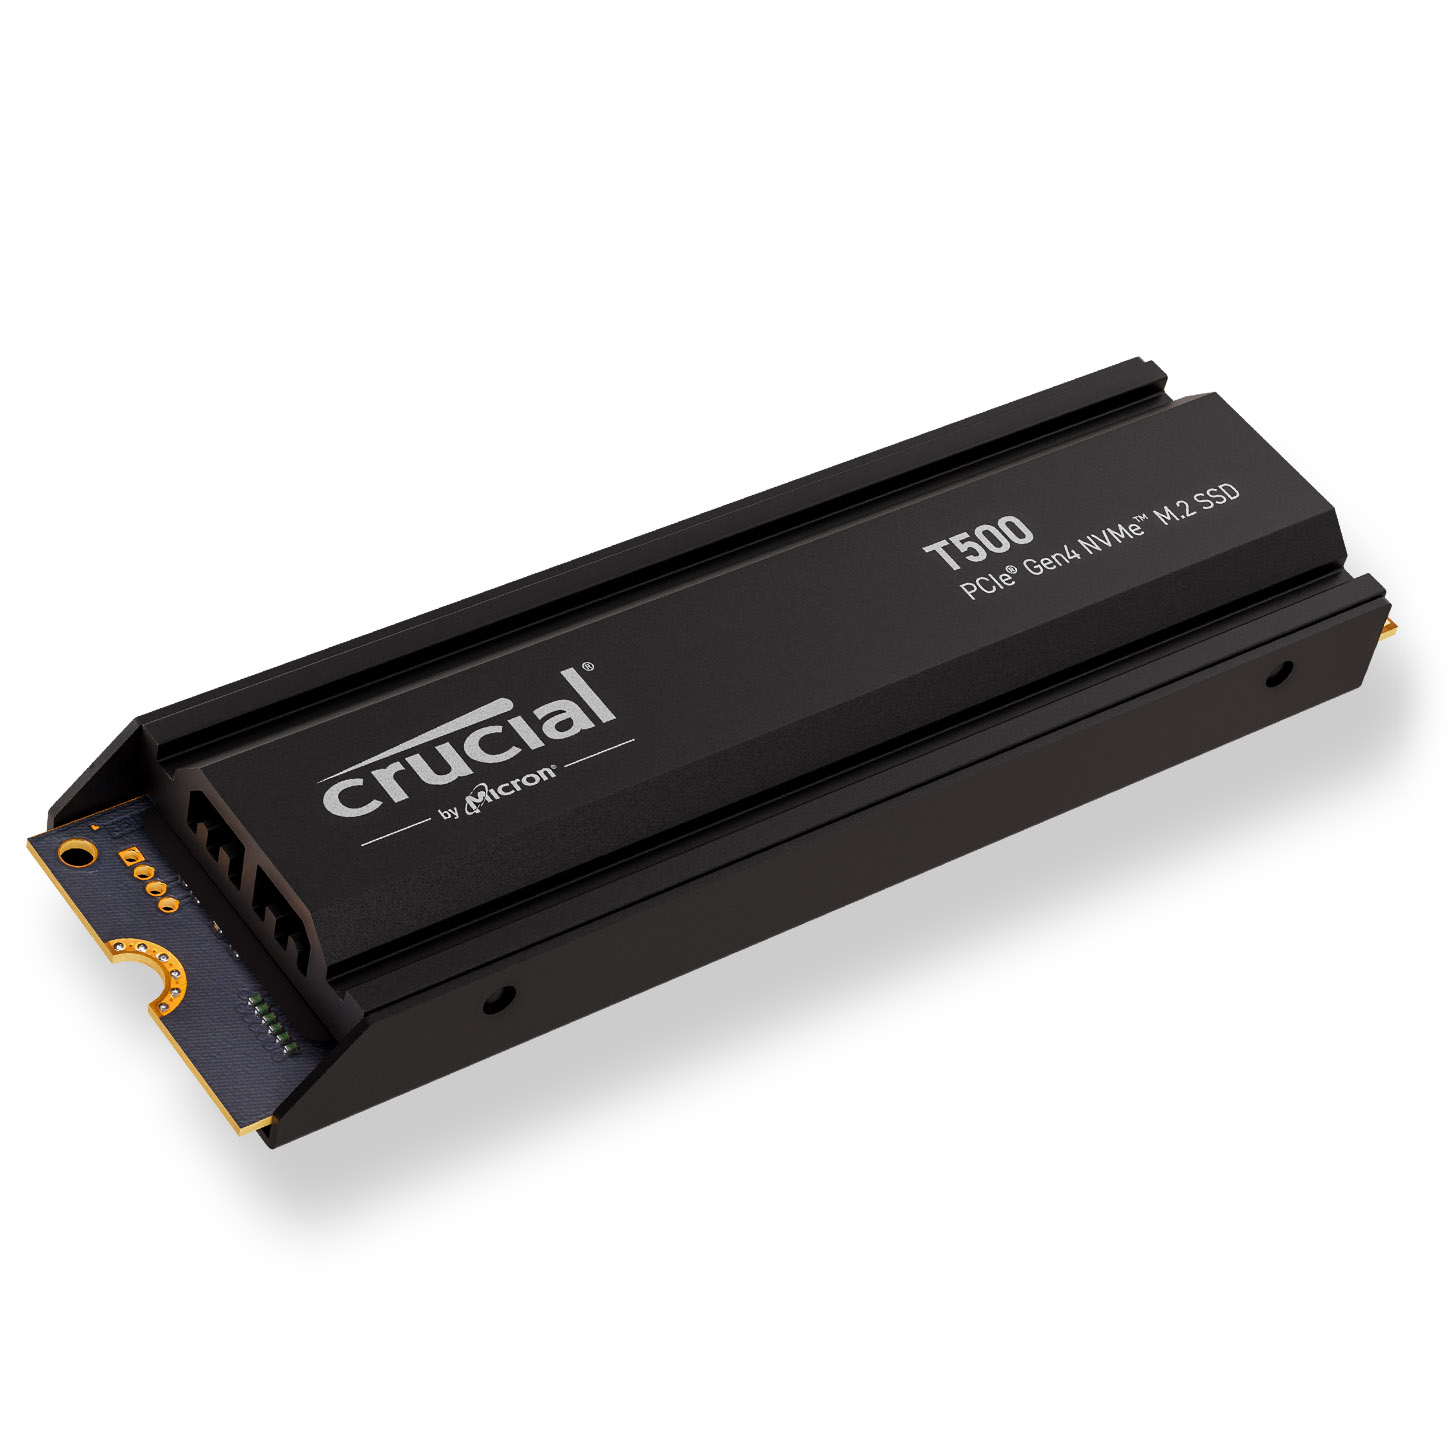 Crucial T500 500GB NVMe PCIe Gen4 M.2 Solid State Drive